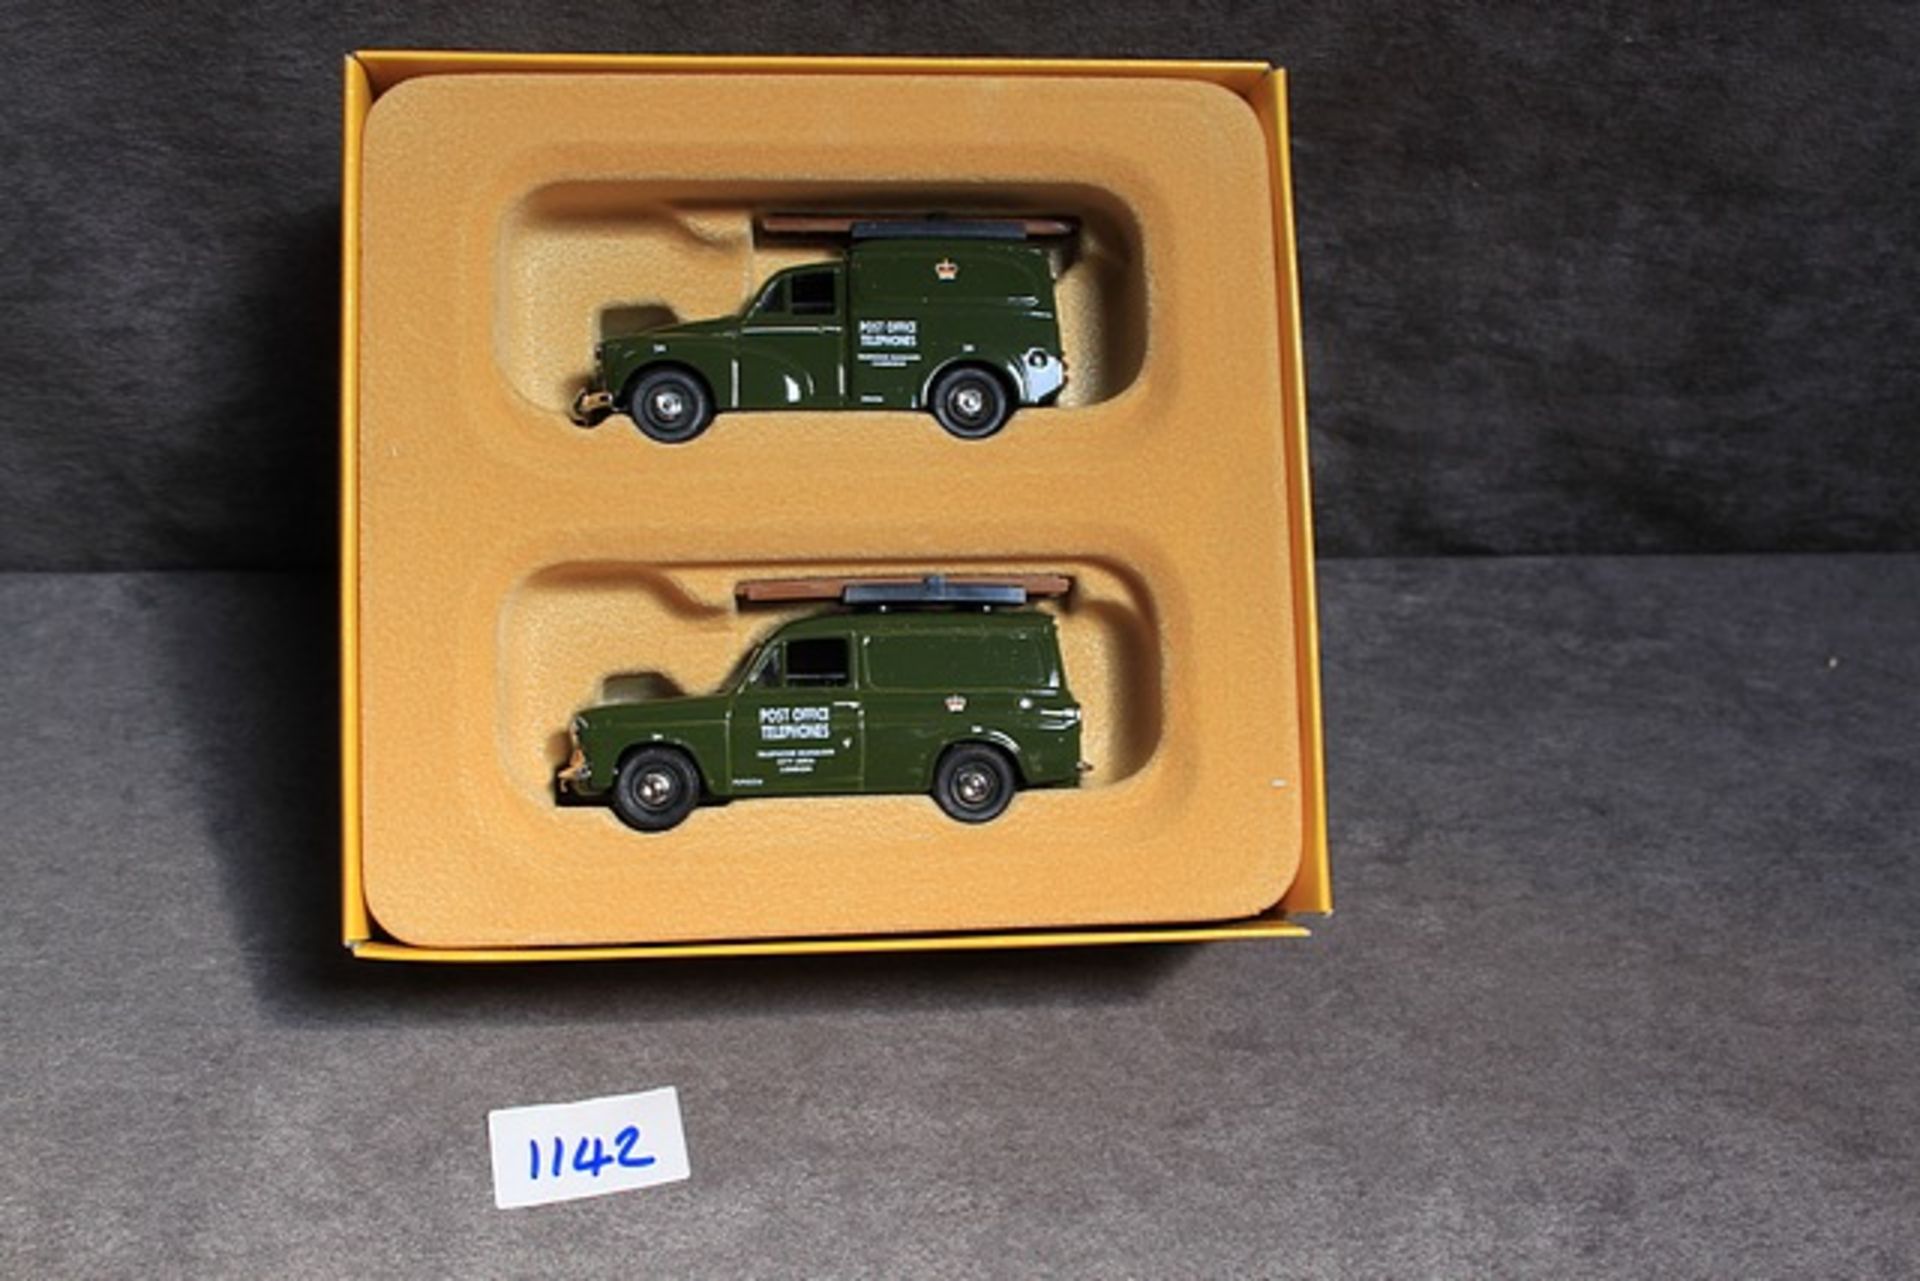 Vanguard diecast #PO 1002 Post Office Telephone Service Vans of the 50's & 60's in box